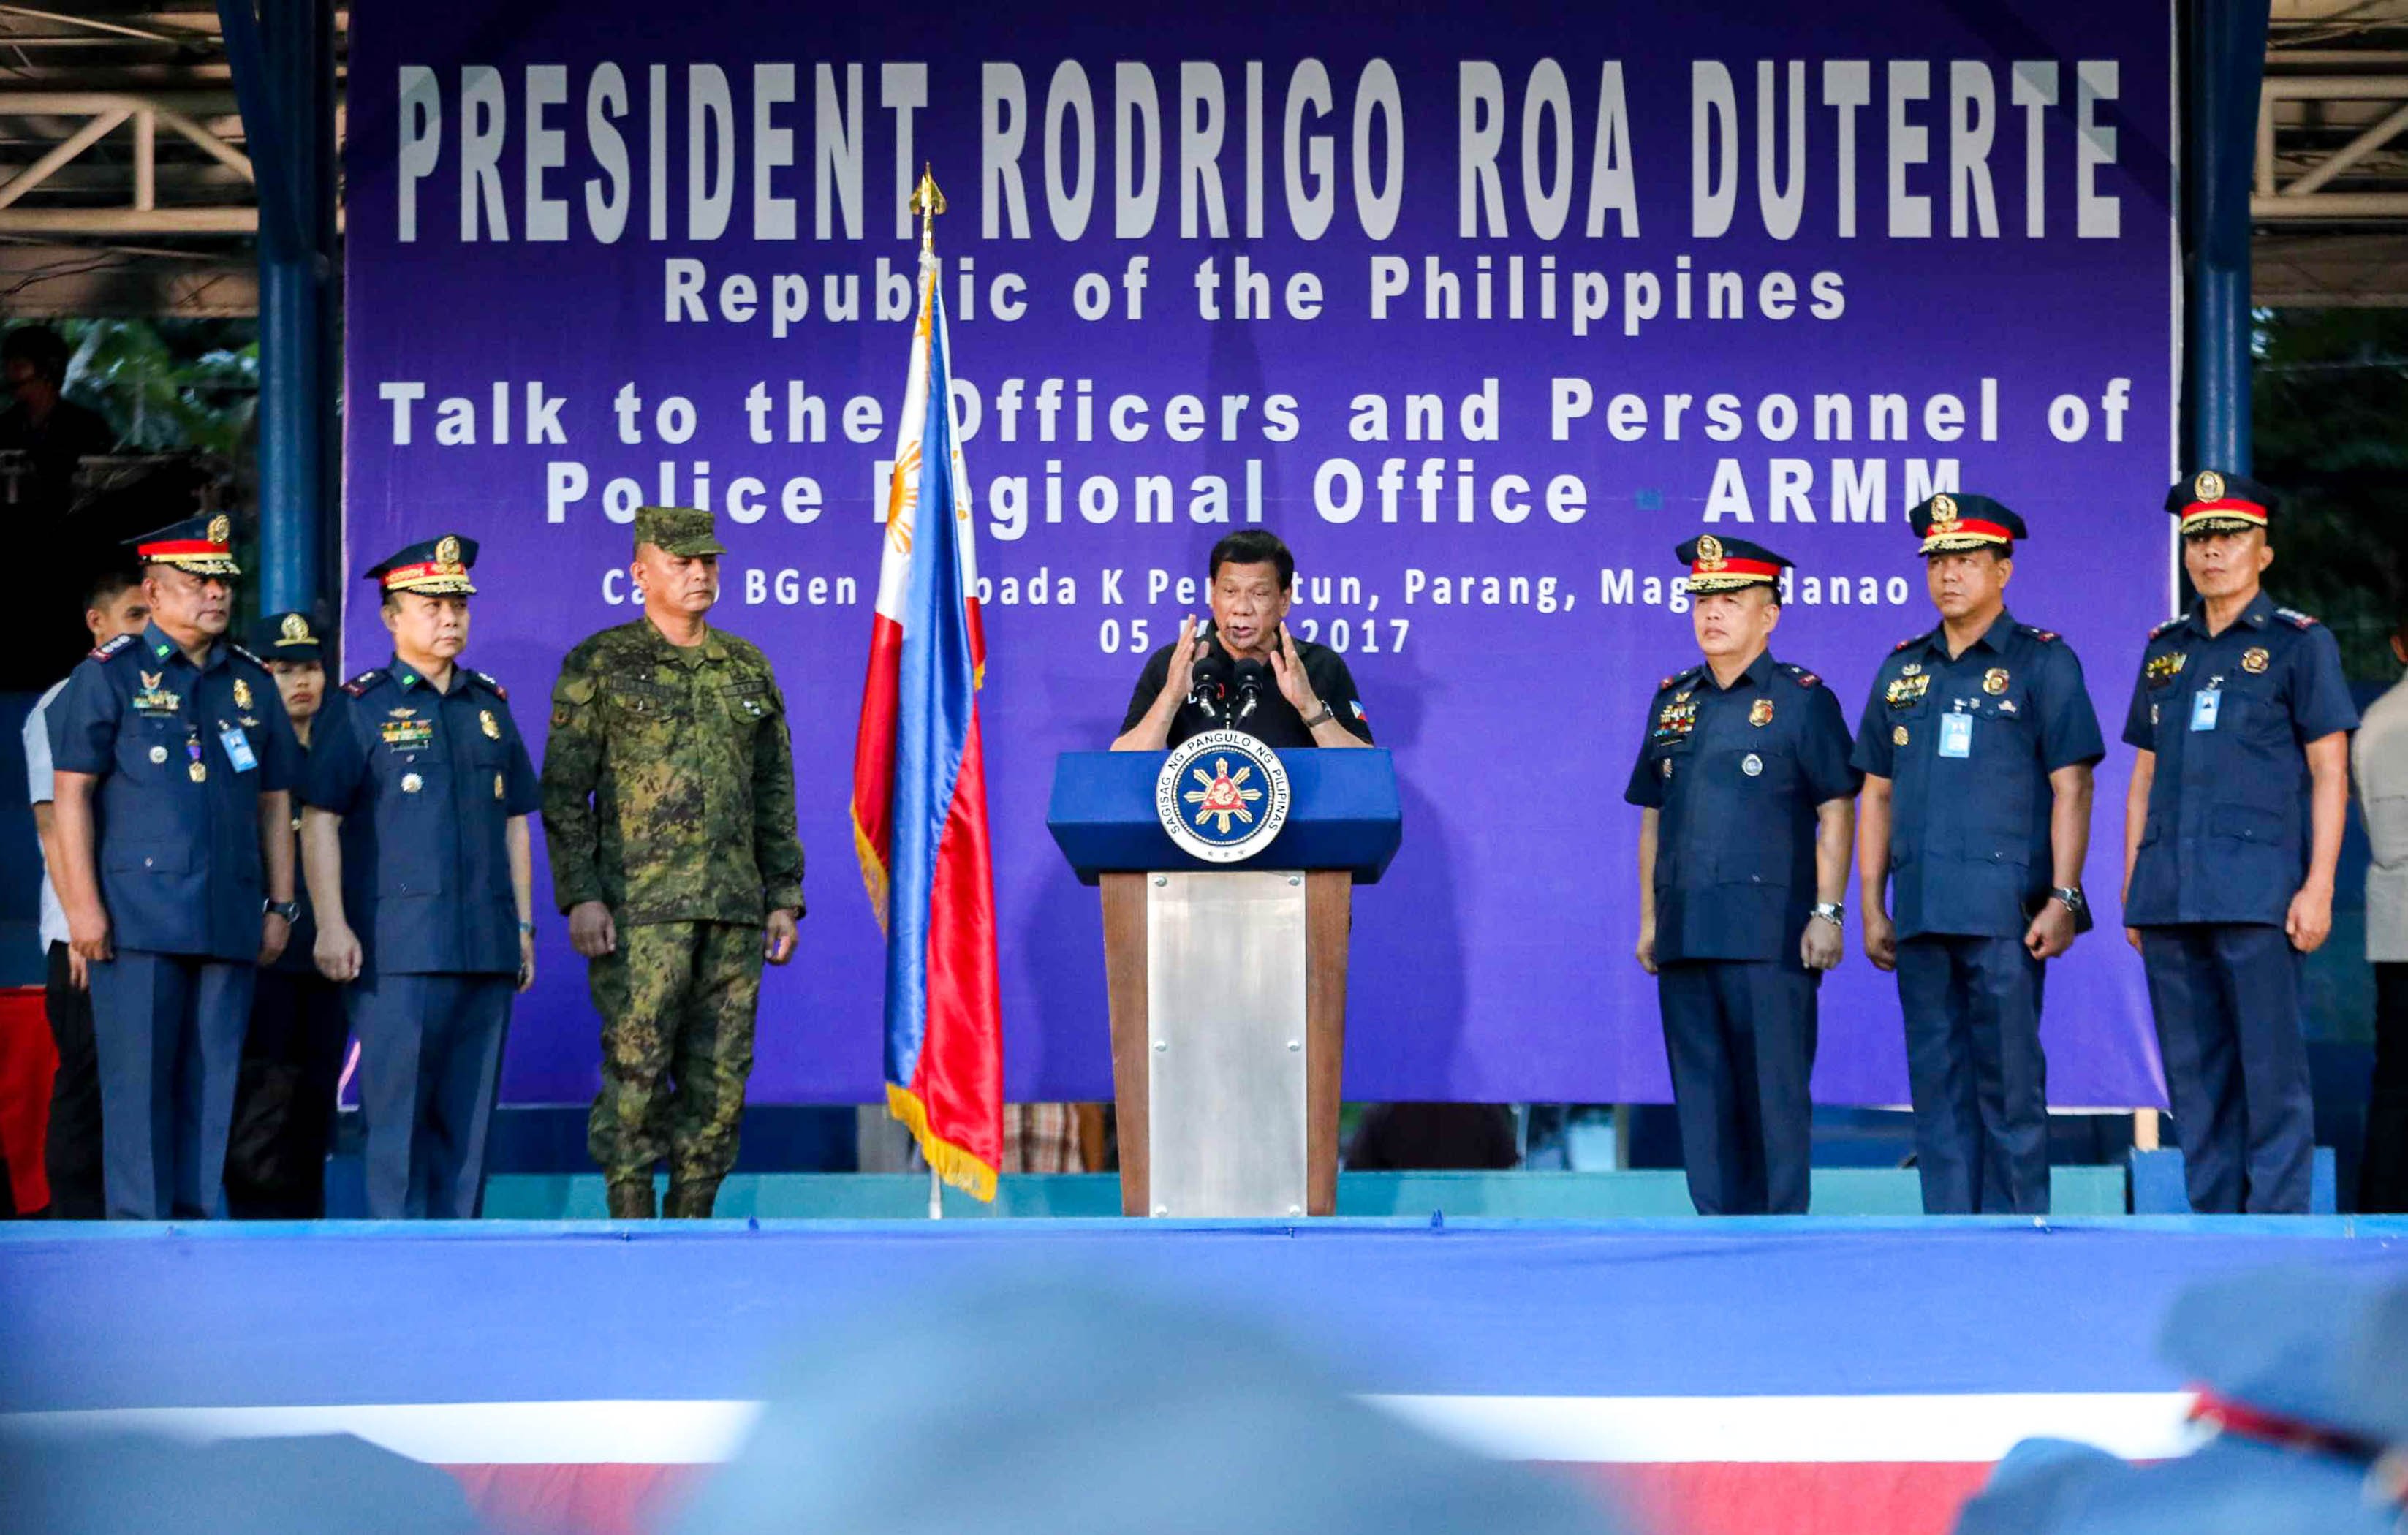 THE LEAST I CAN DO: Pres. Duterte assures work, education for families of fallen cops